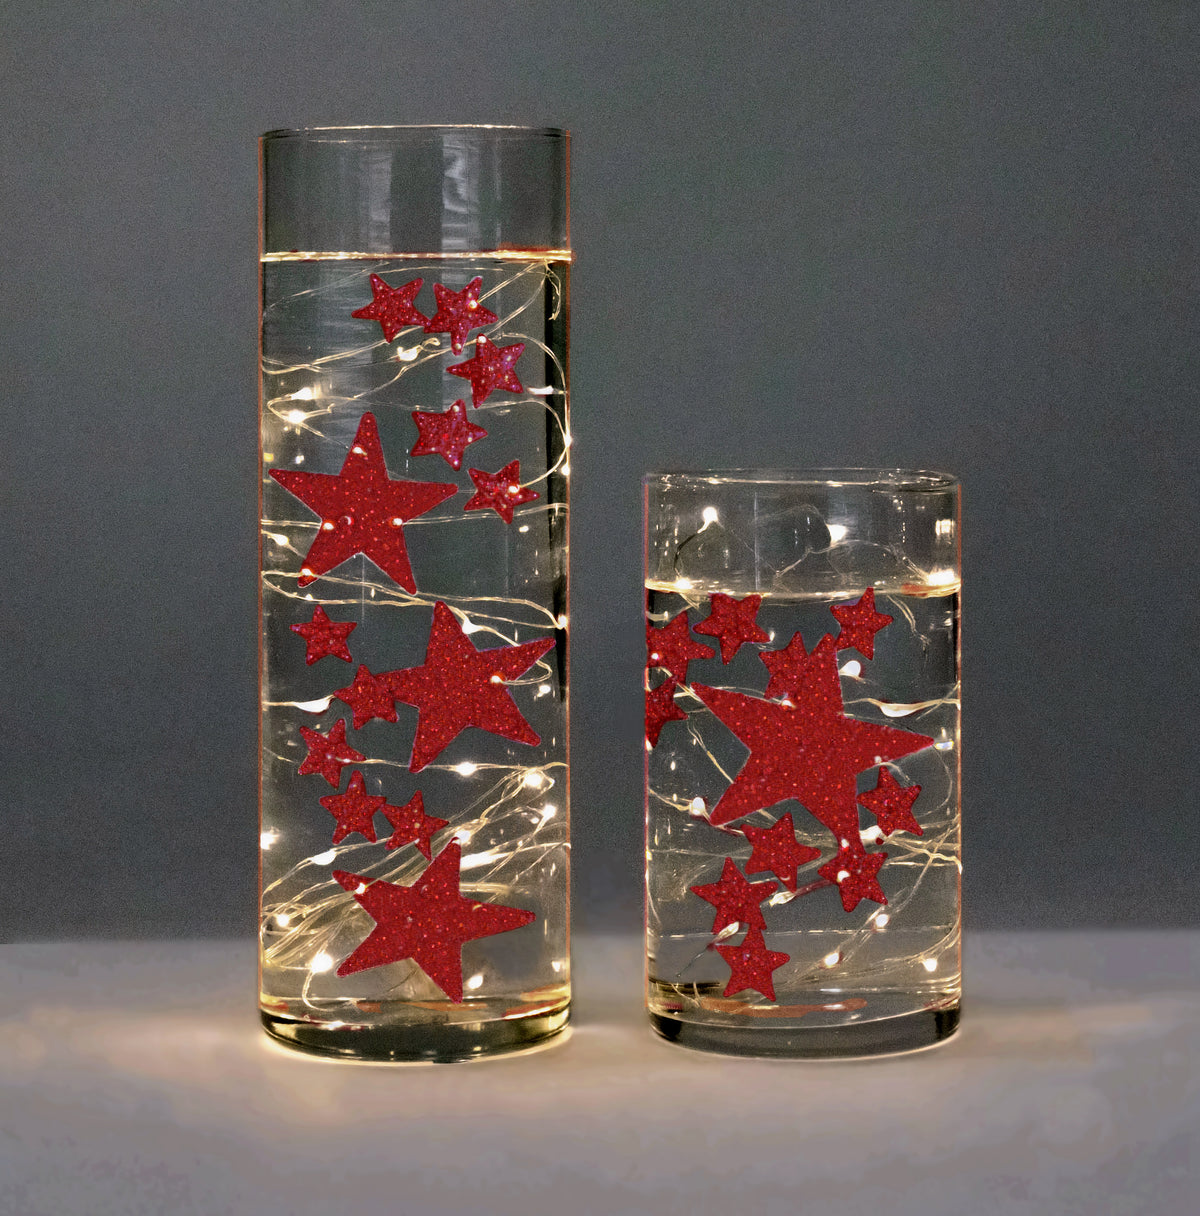 Floating Red Sparkling Stars-Large Sizes-Fills 1 Gallon for Your Vases-With Option: 3 Submersible Fairy Lights-Vase Decorations